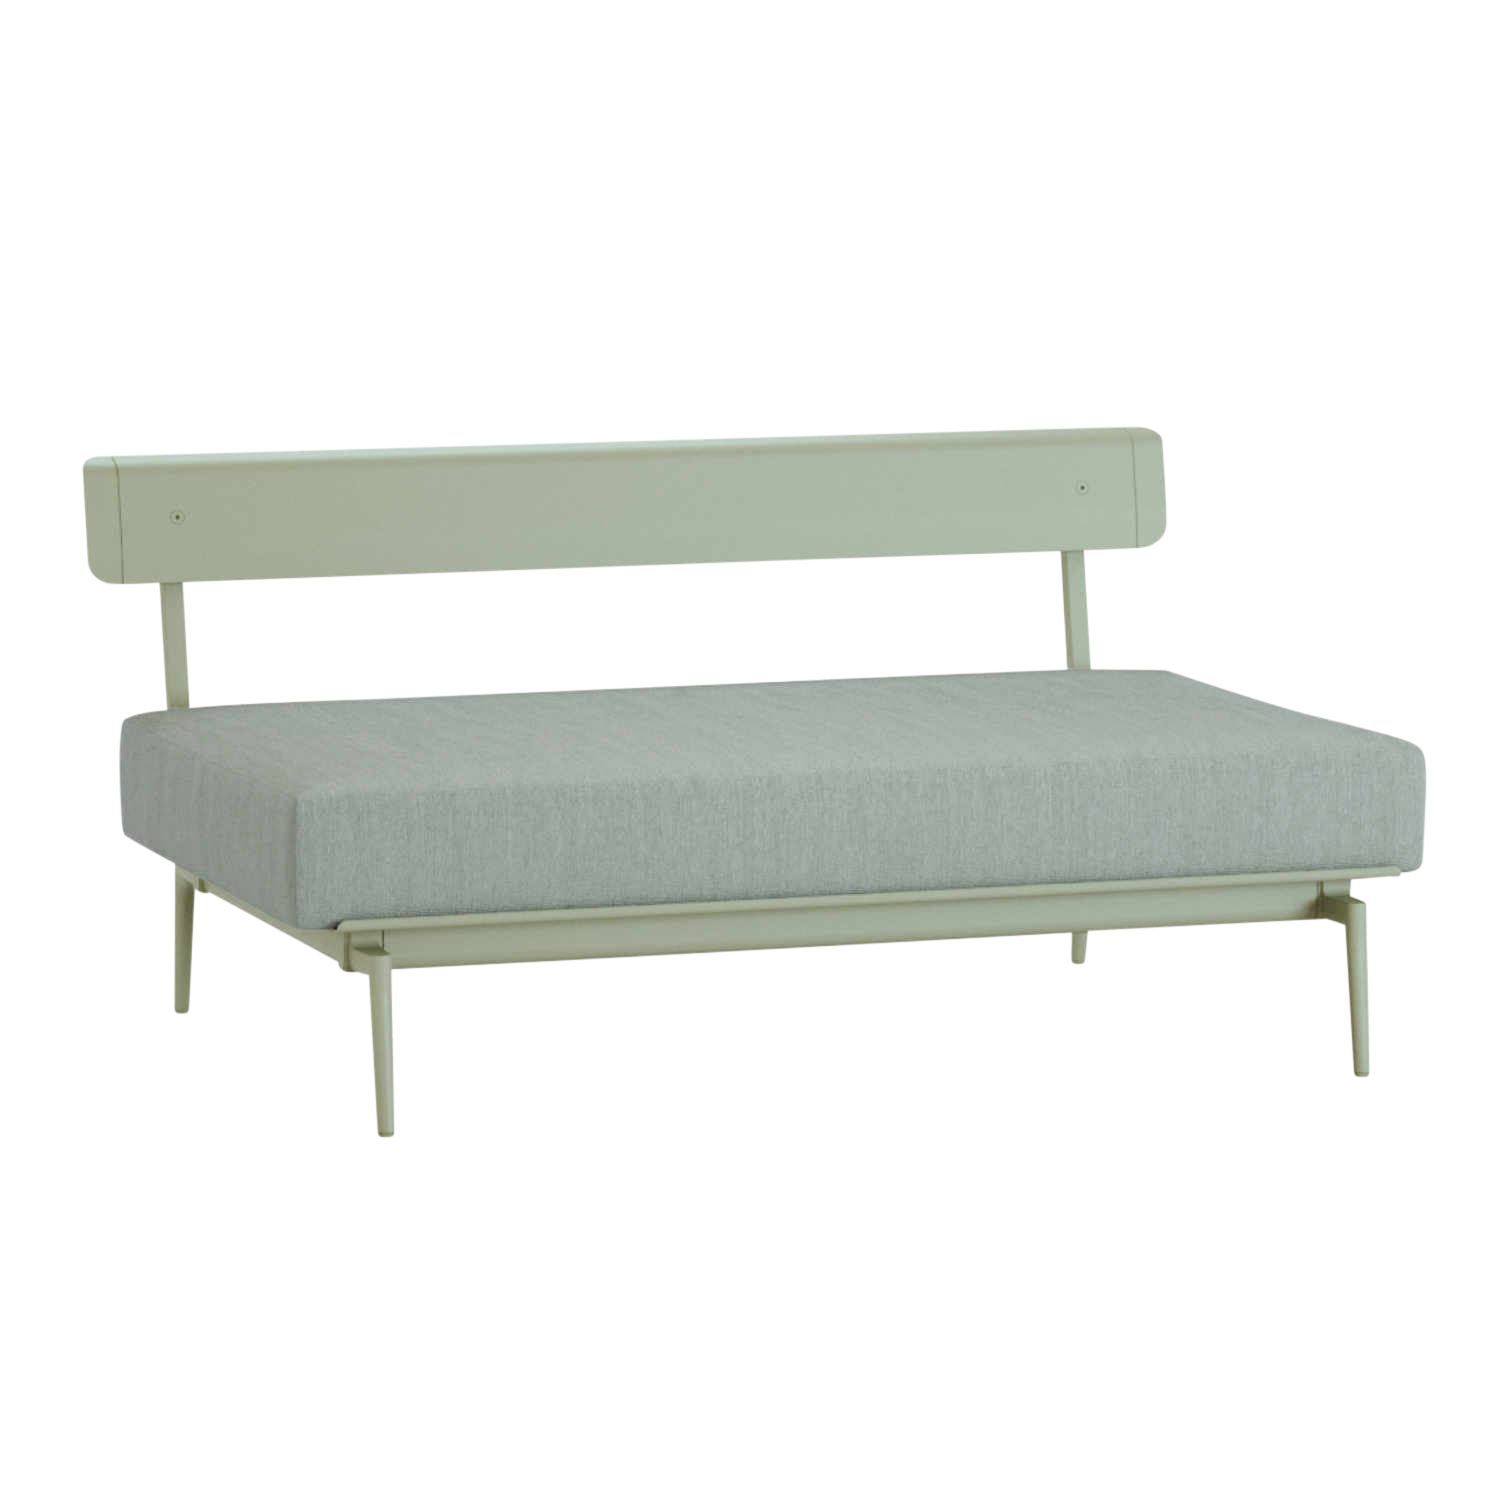 Aikana 202 2er Sofa, Farbe pearly gold (taupe), Stoff range 1 solids, white (weiss) von FAST